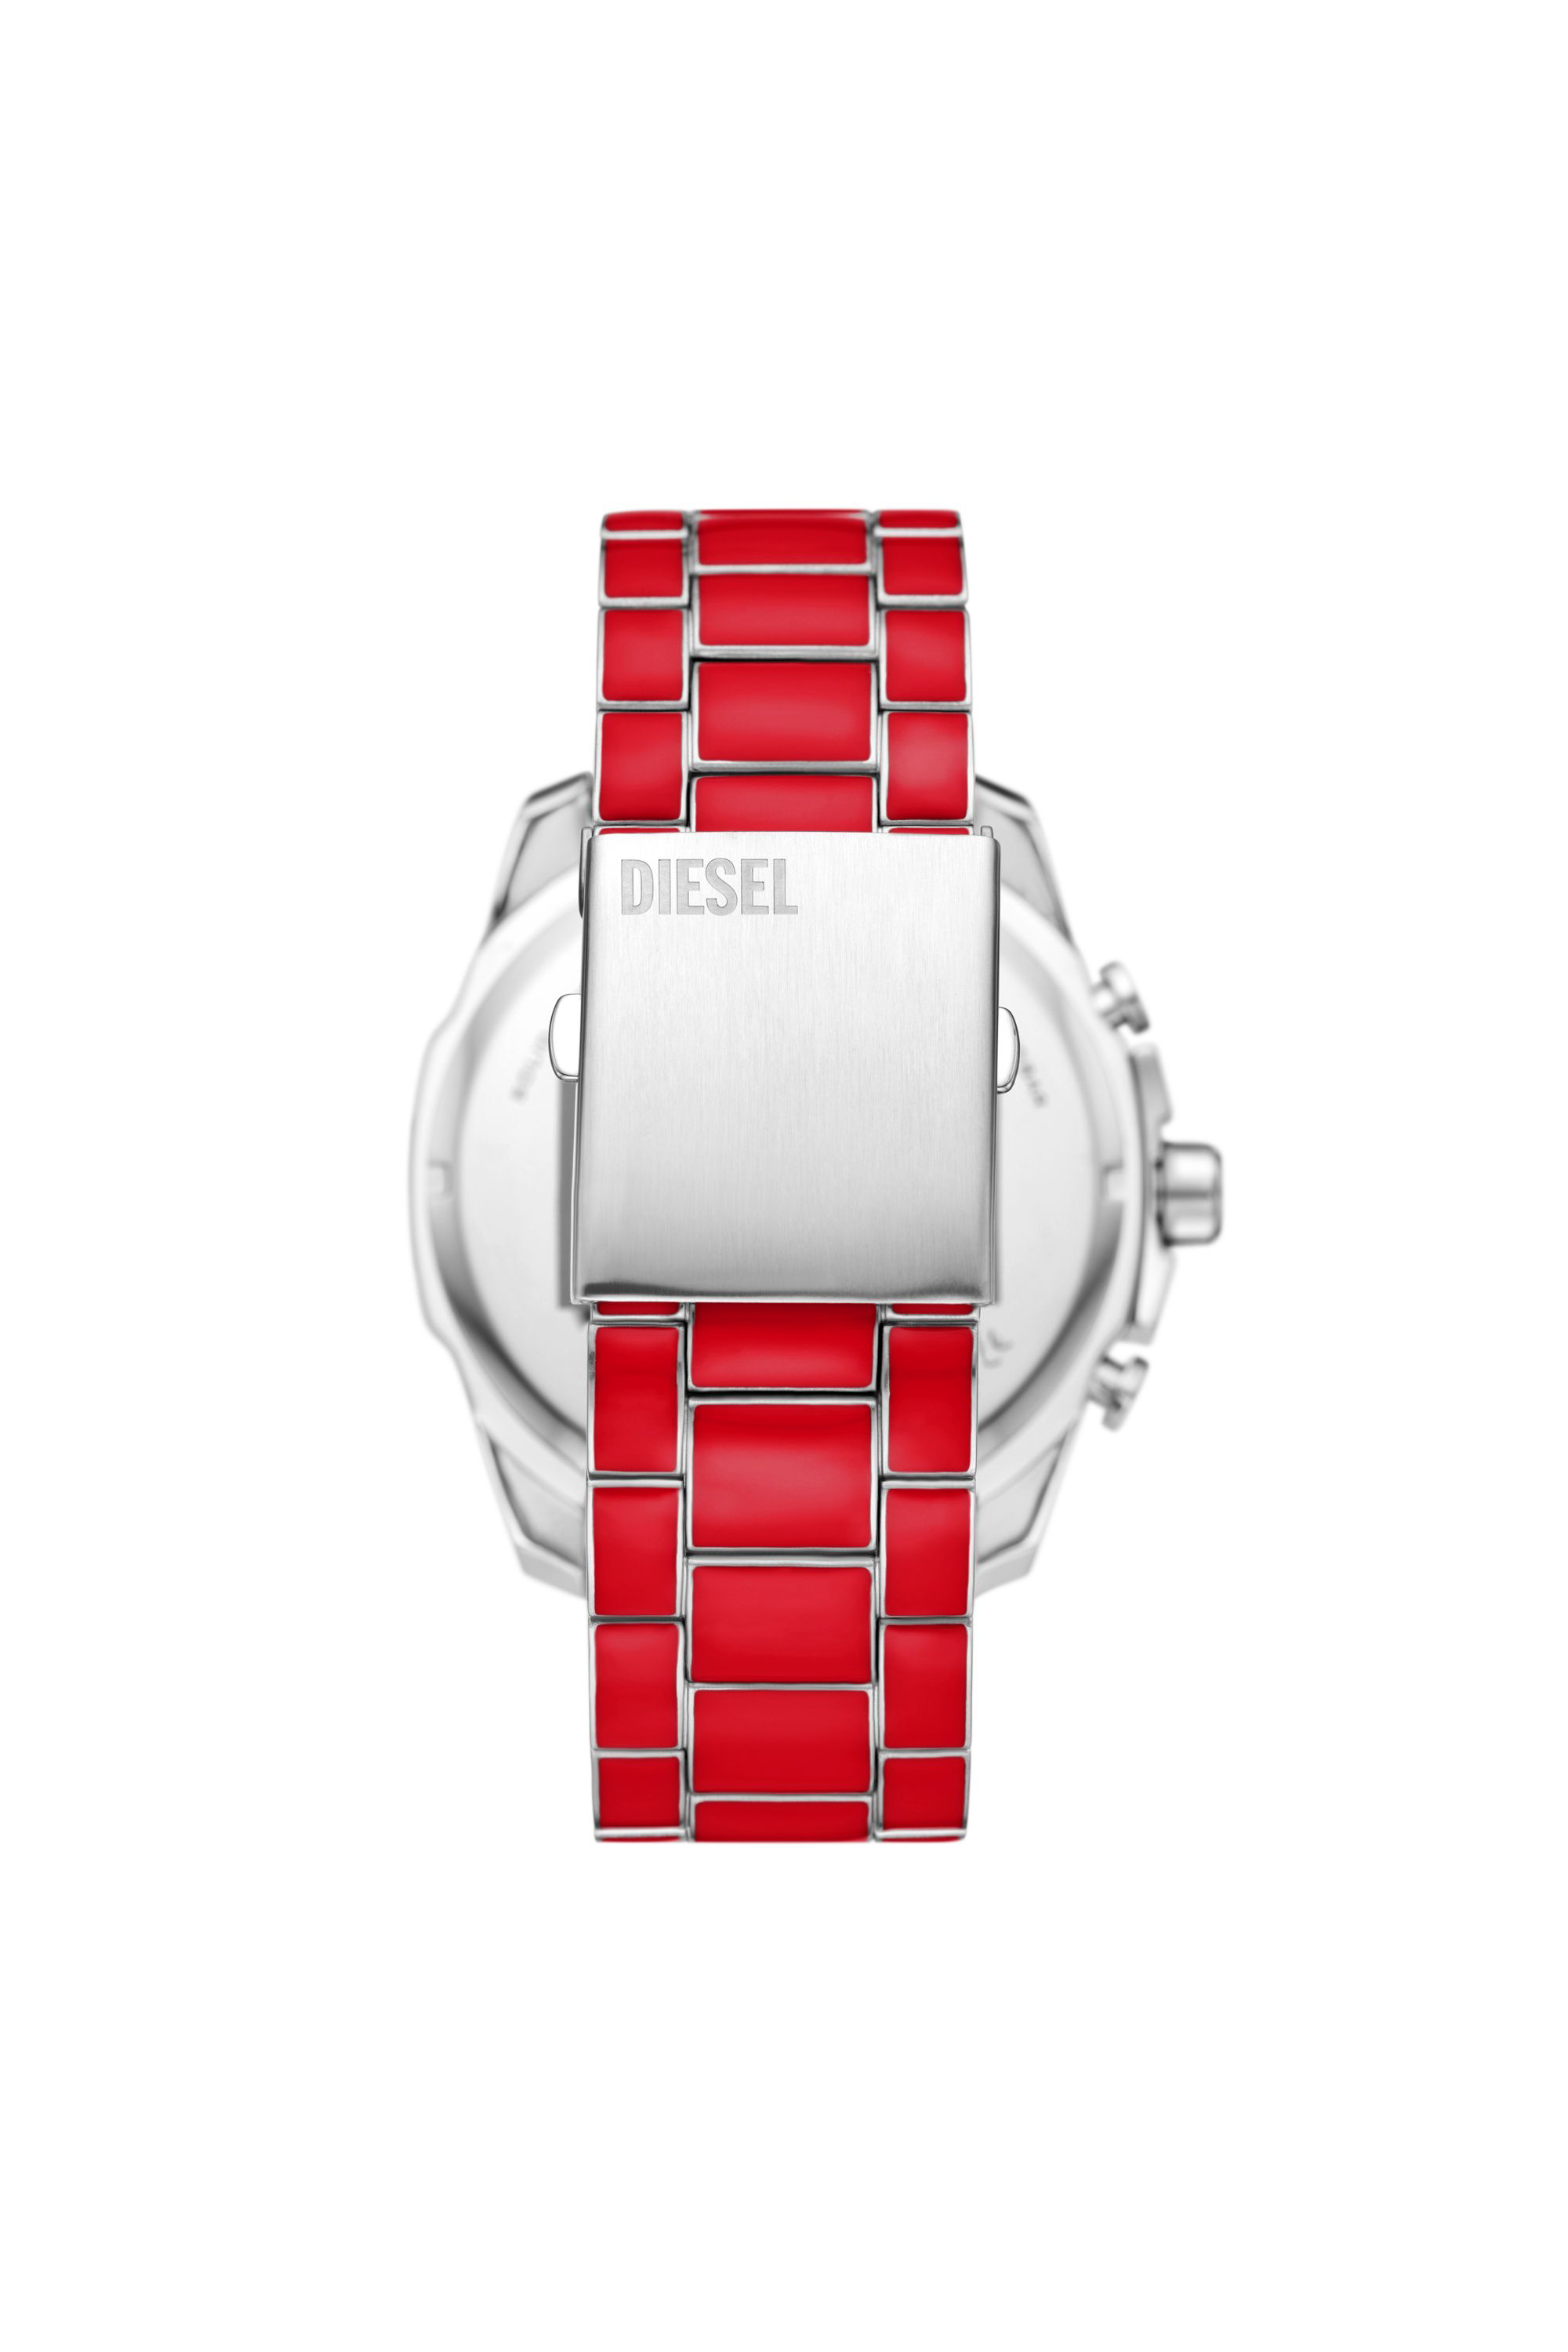 Diesel - DZ4638, Male Mega Chief red enamel and stainless steel watch in Red - Image 2